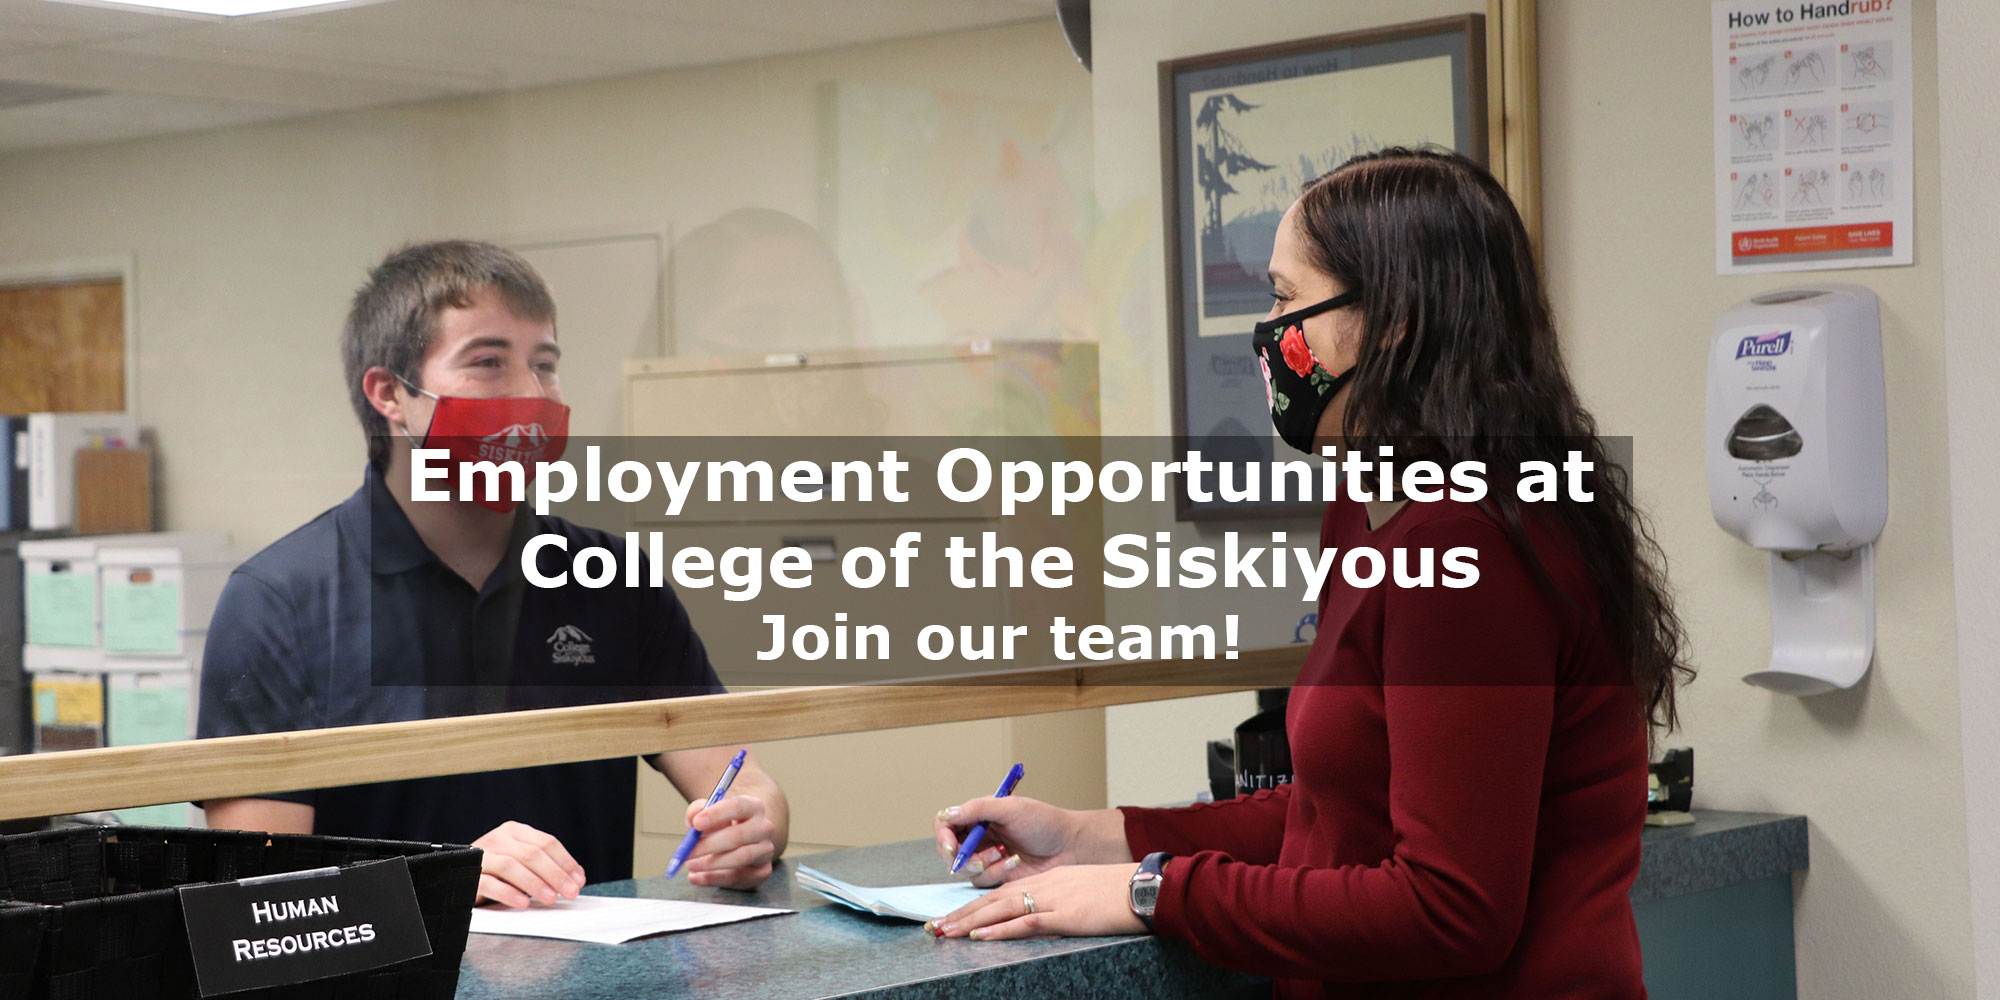 Employment Opportunities at College of the Siskiyous. Join our team!